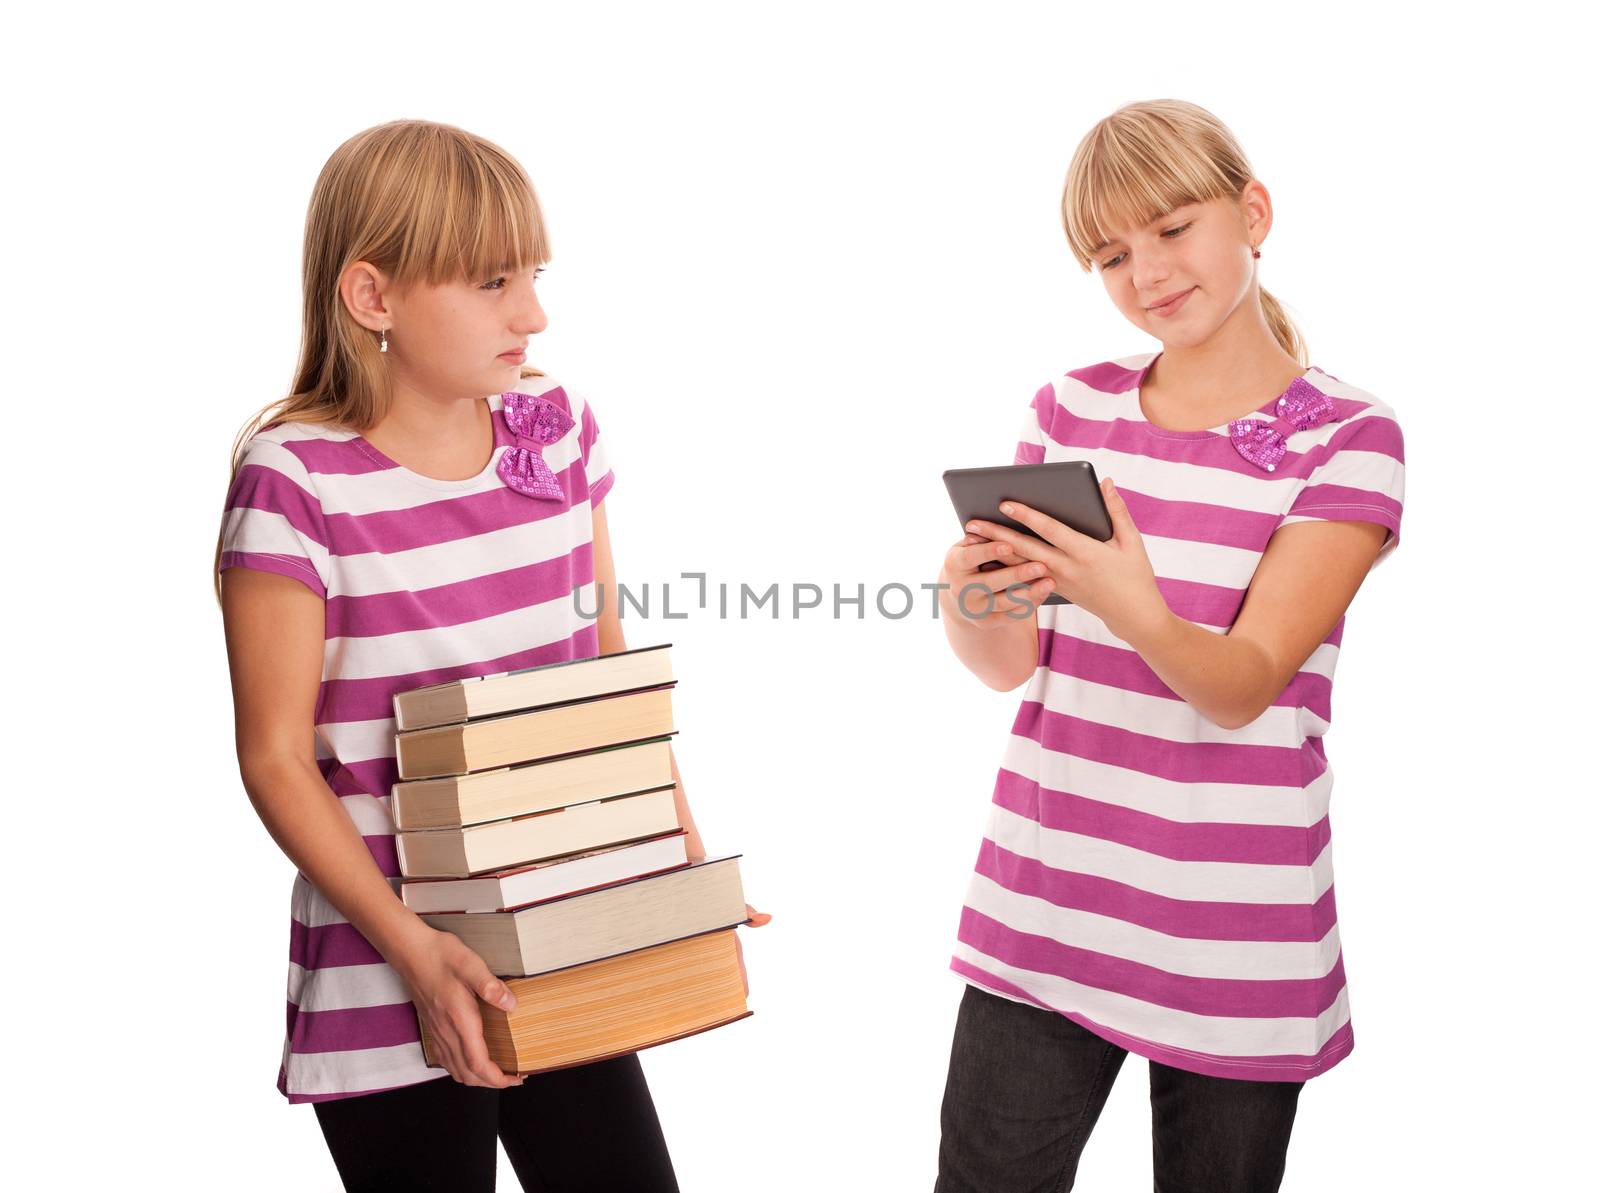 Books vs ebook reader - One girl holding lots of books and watching enviously another girl reading an ebook reader and smiling.